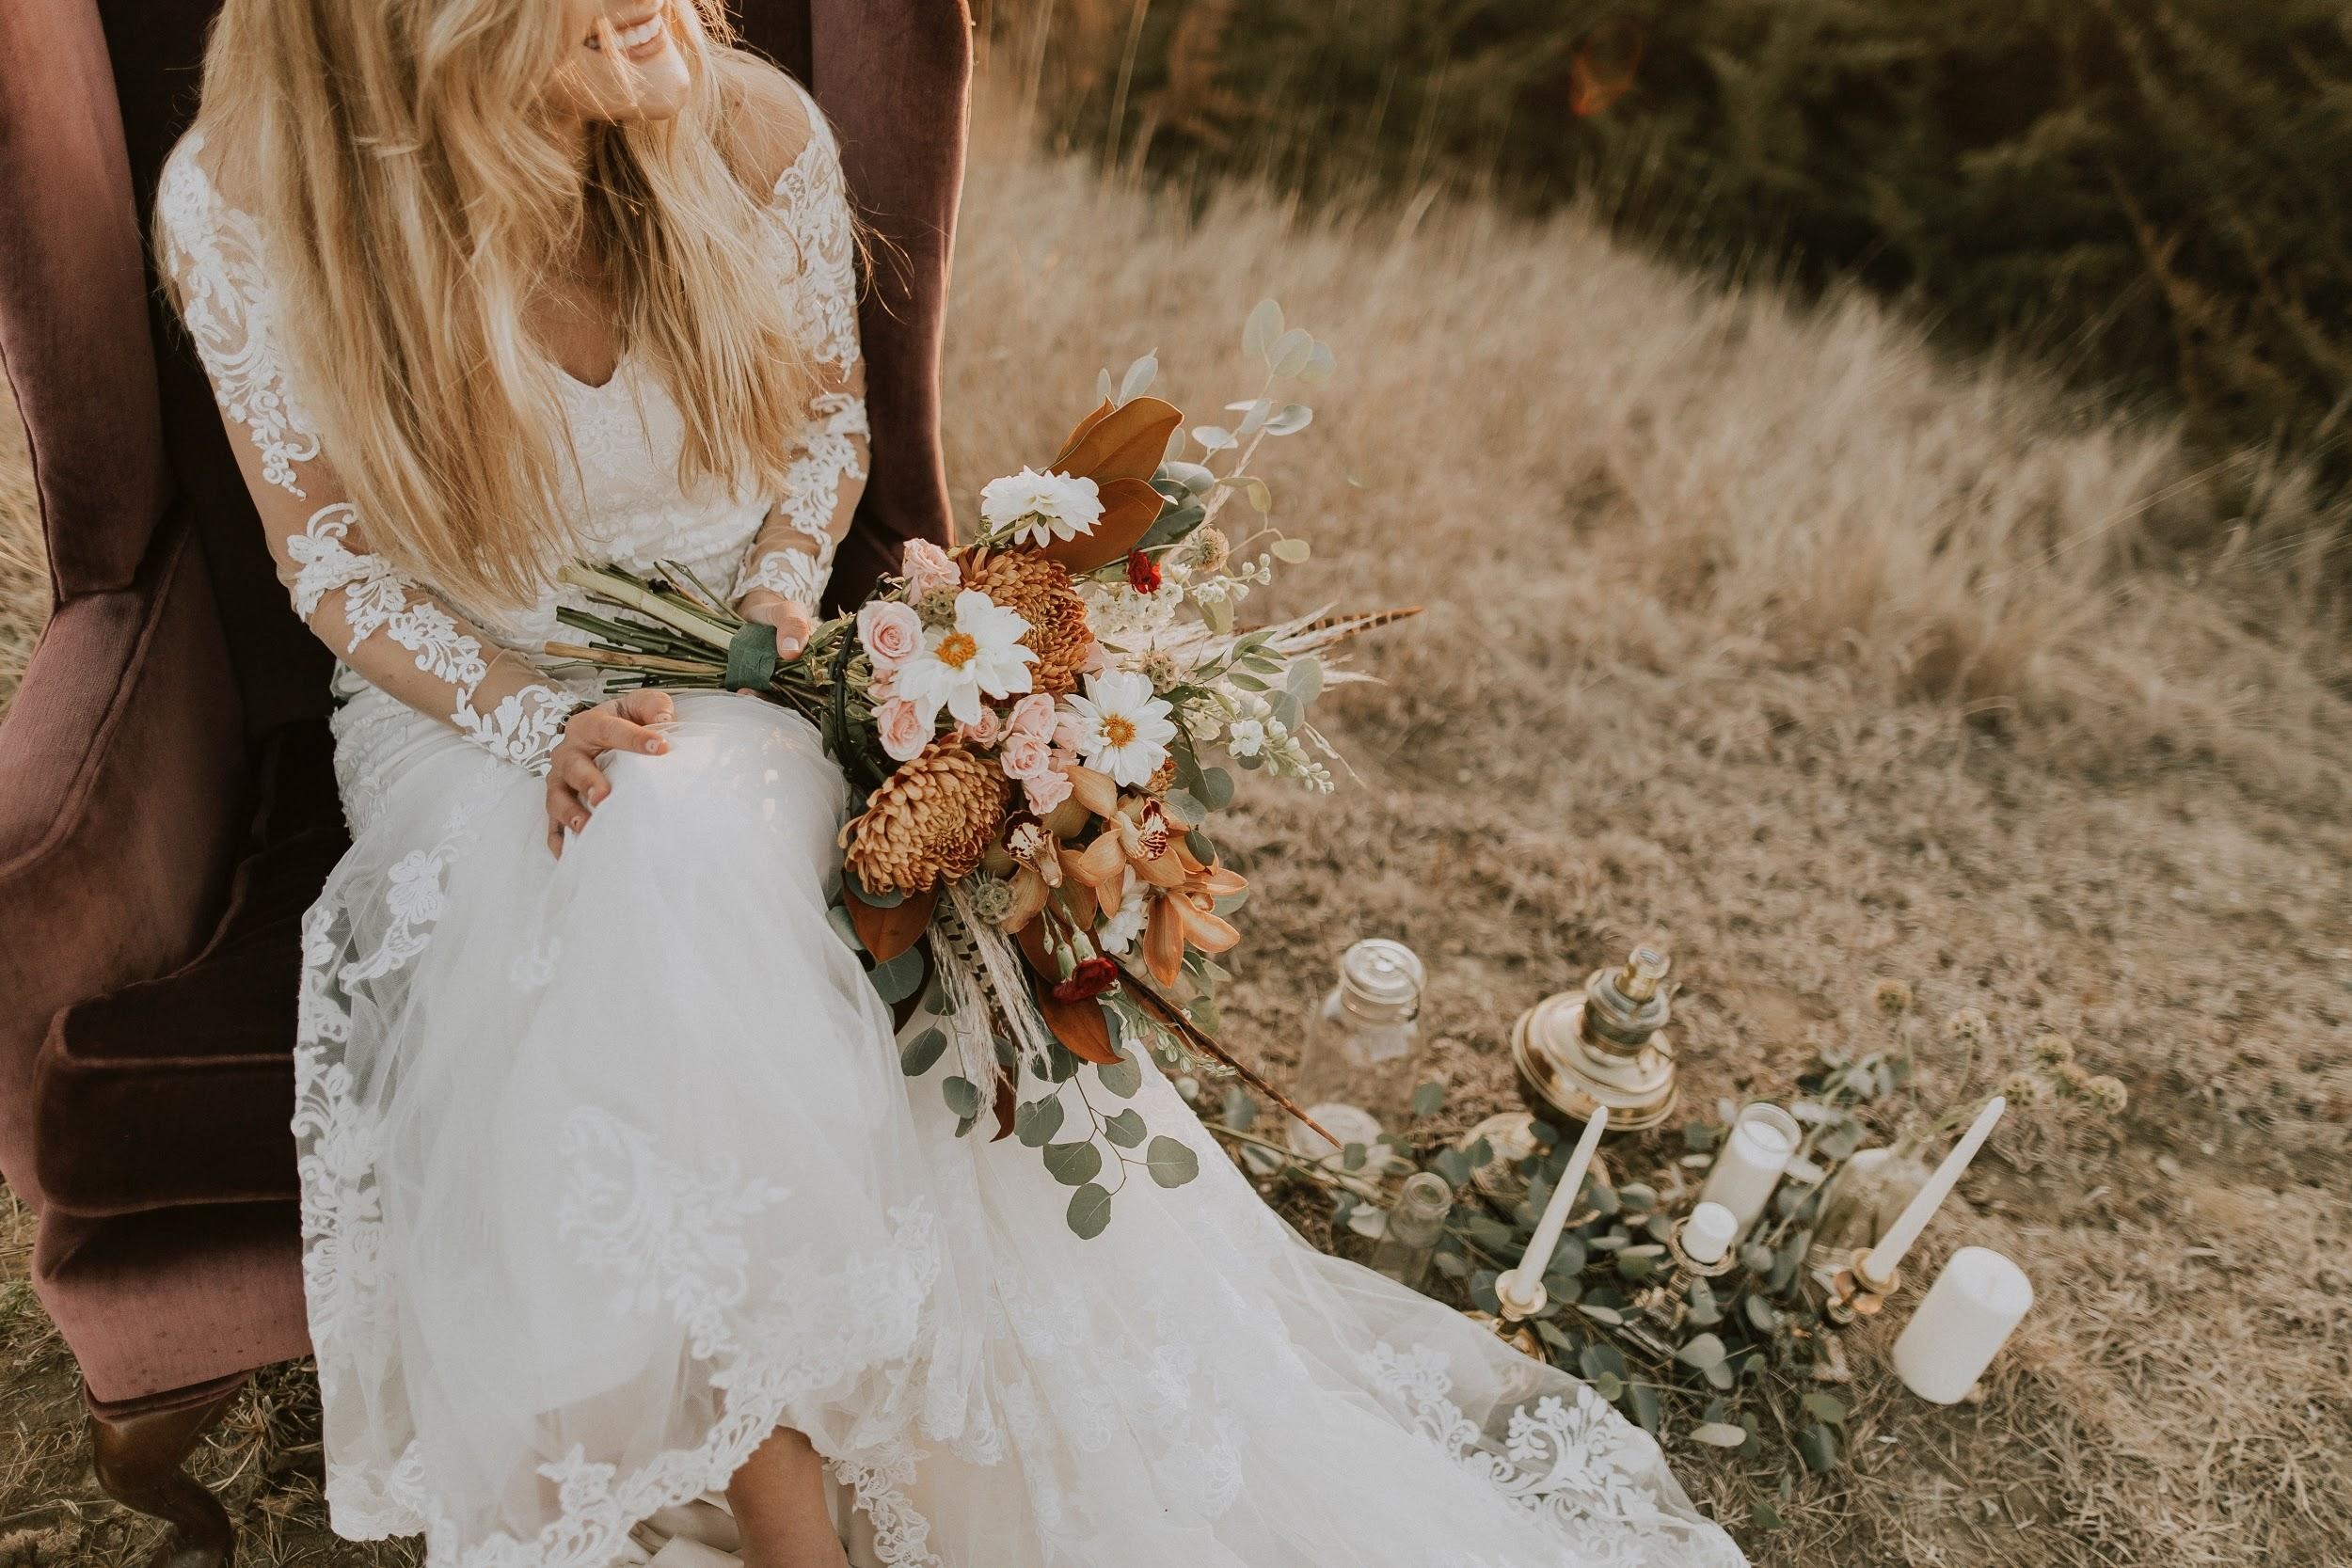 Woman in a wedding dress with her bouquet sitting on the grass